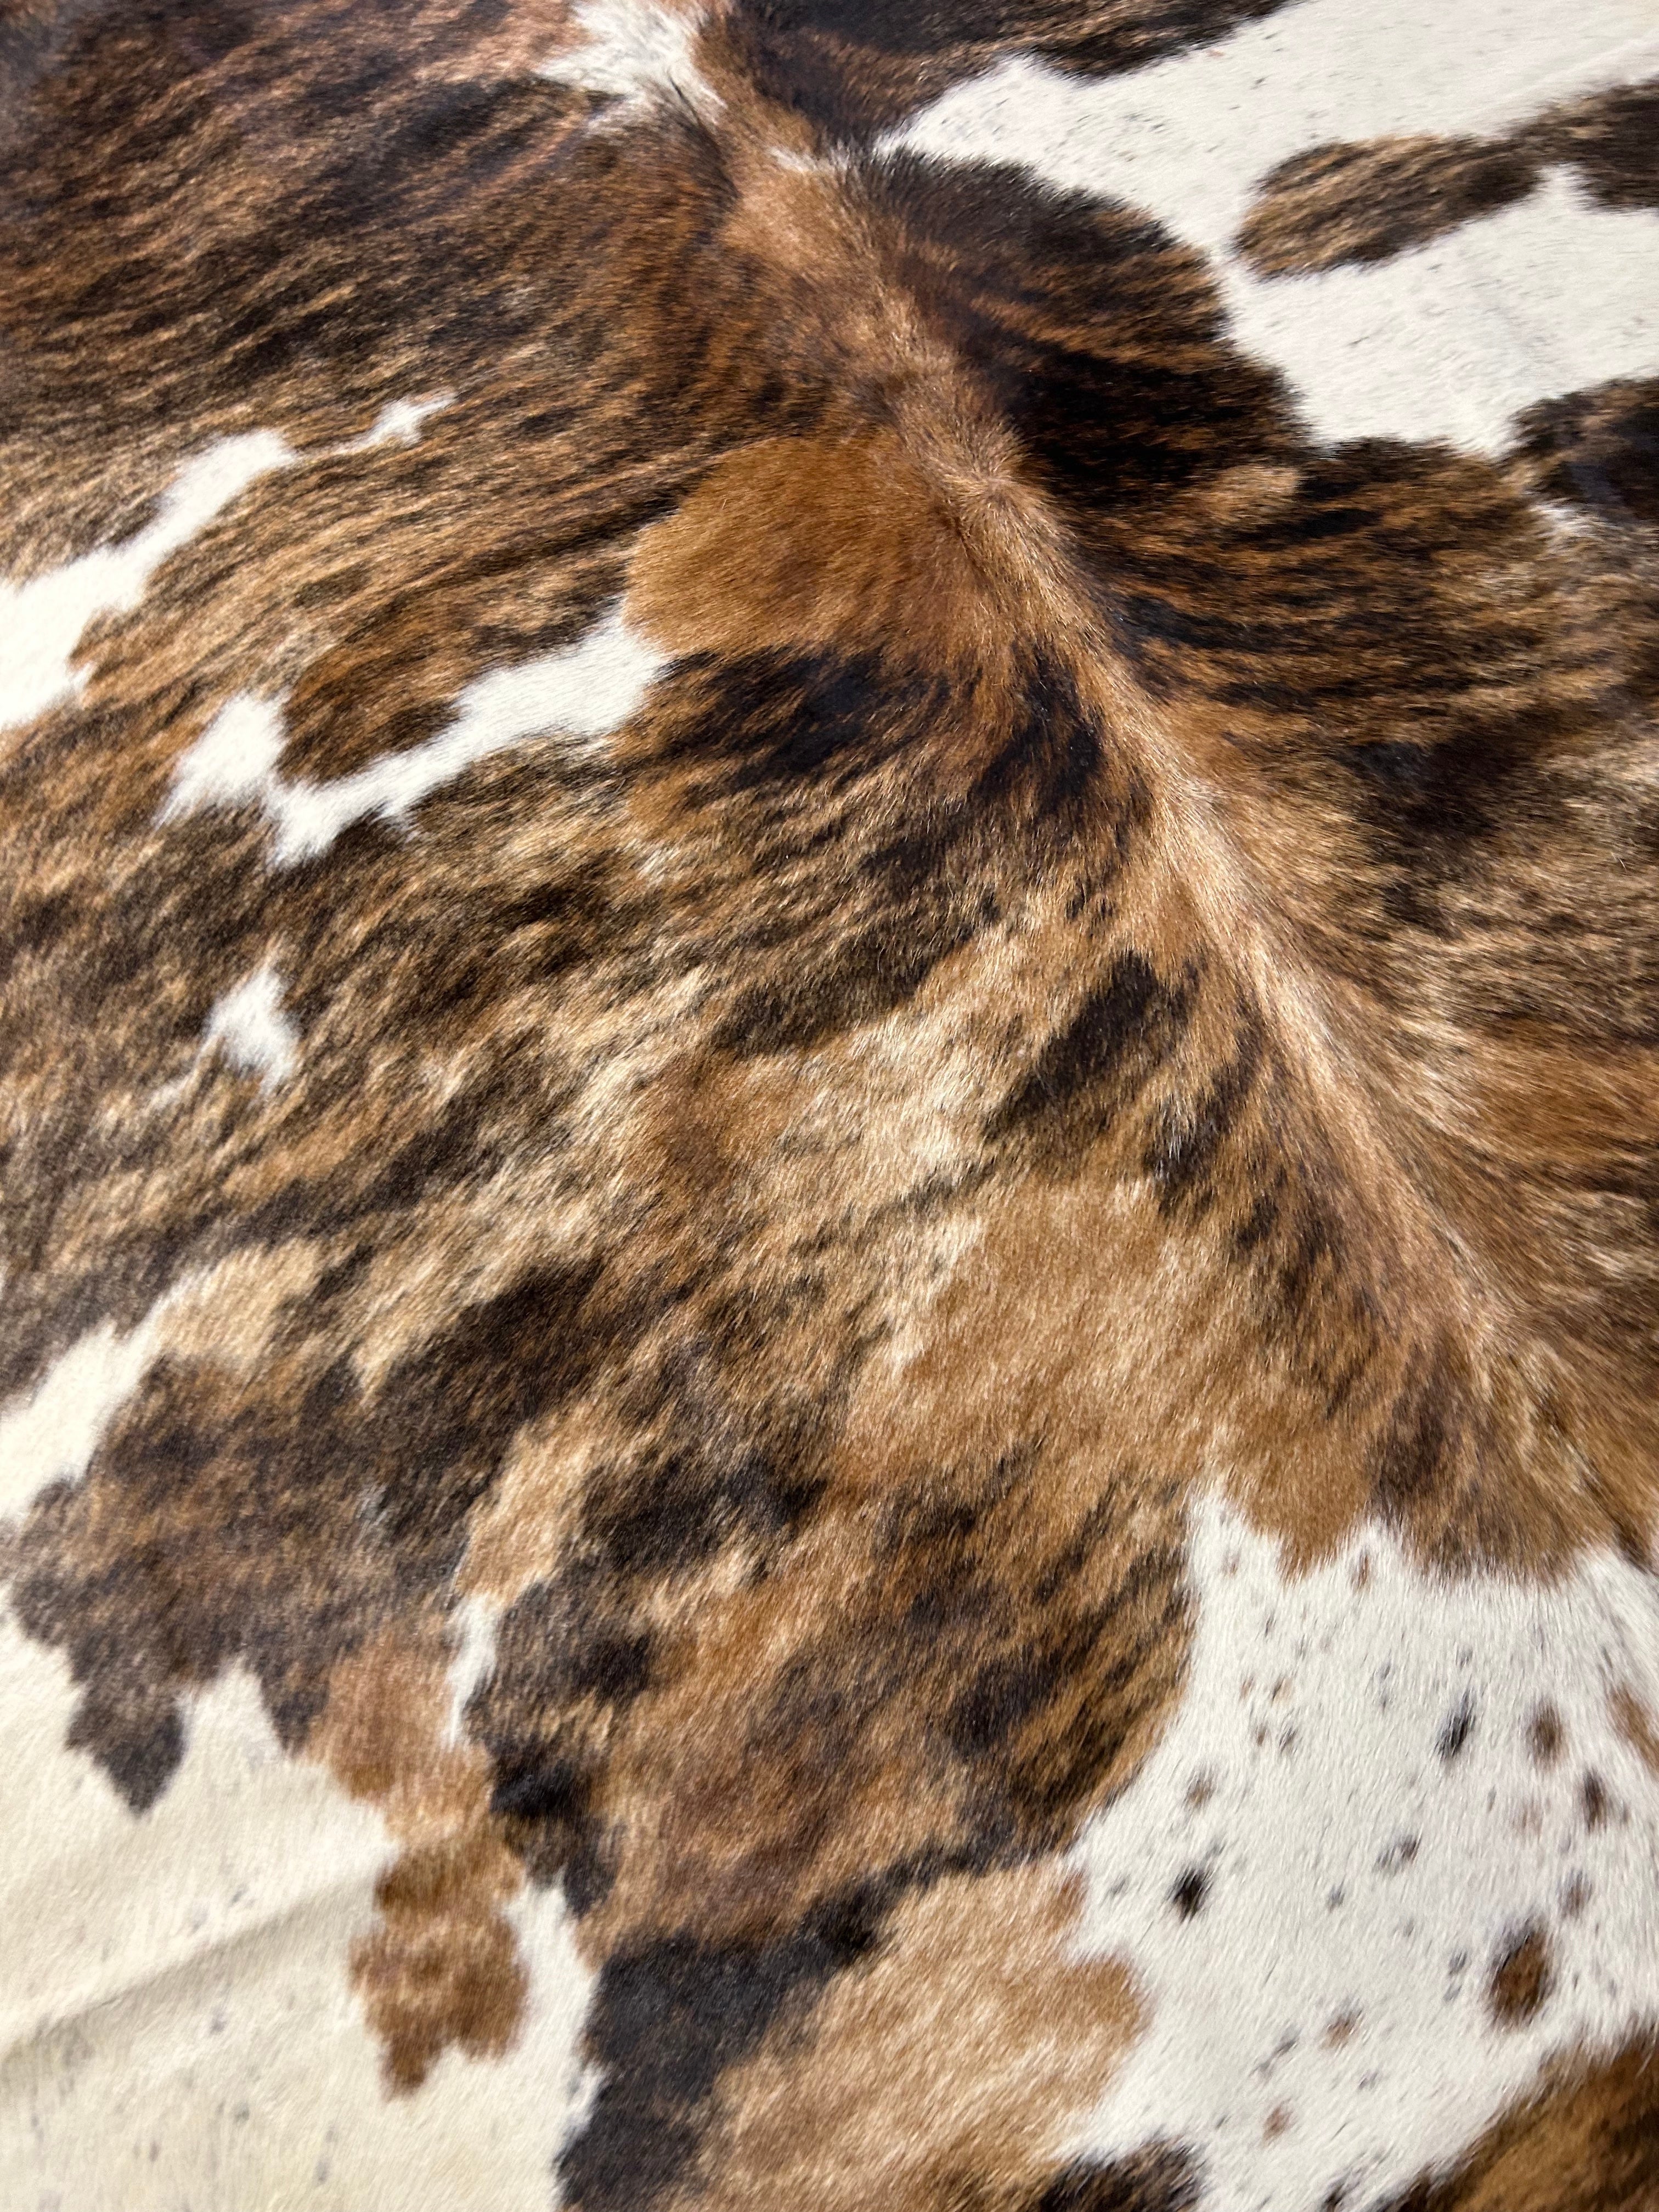 Brazilian Tricolor Speckled Cowhide Rug - Size: 9x7.7 feet O-402